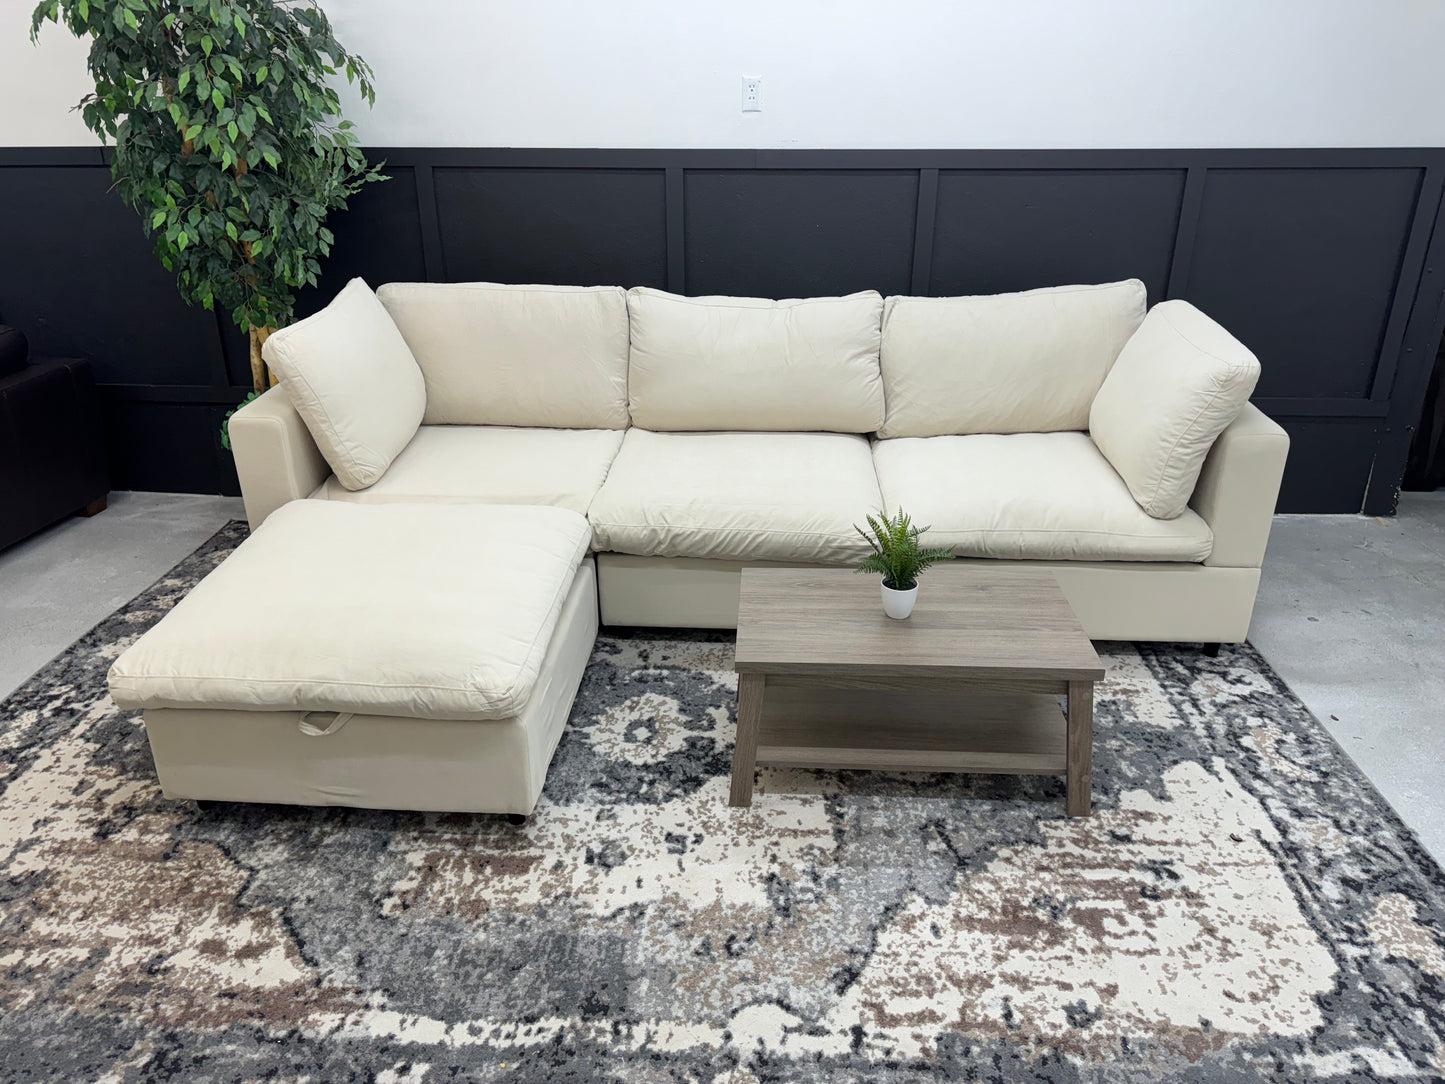 BRAND NEW Beige Modular Cloud Sectional Couch